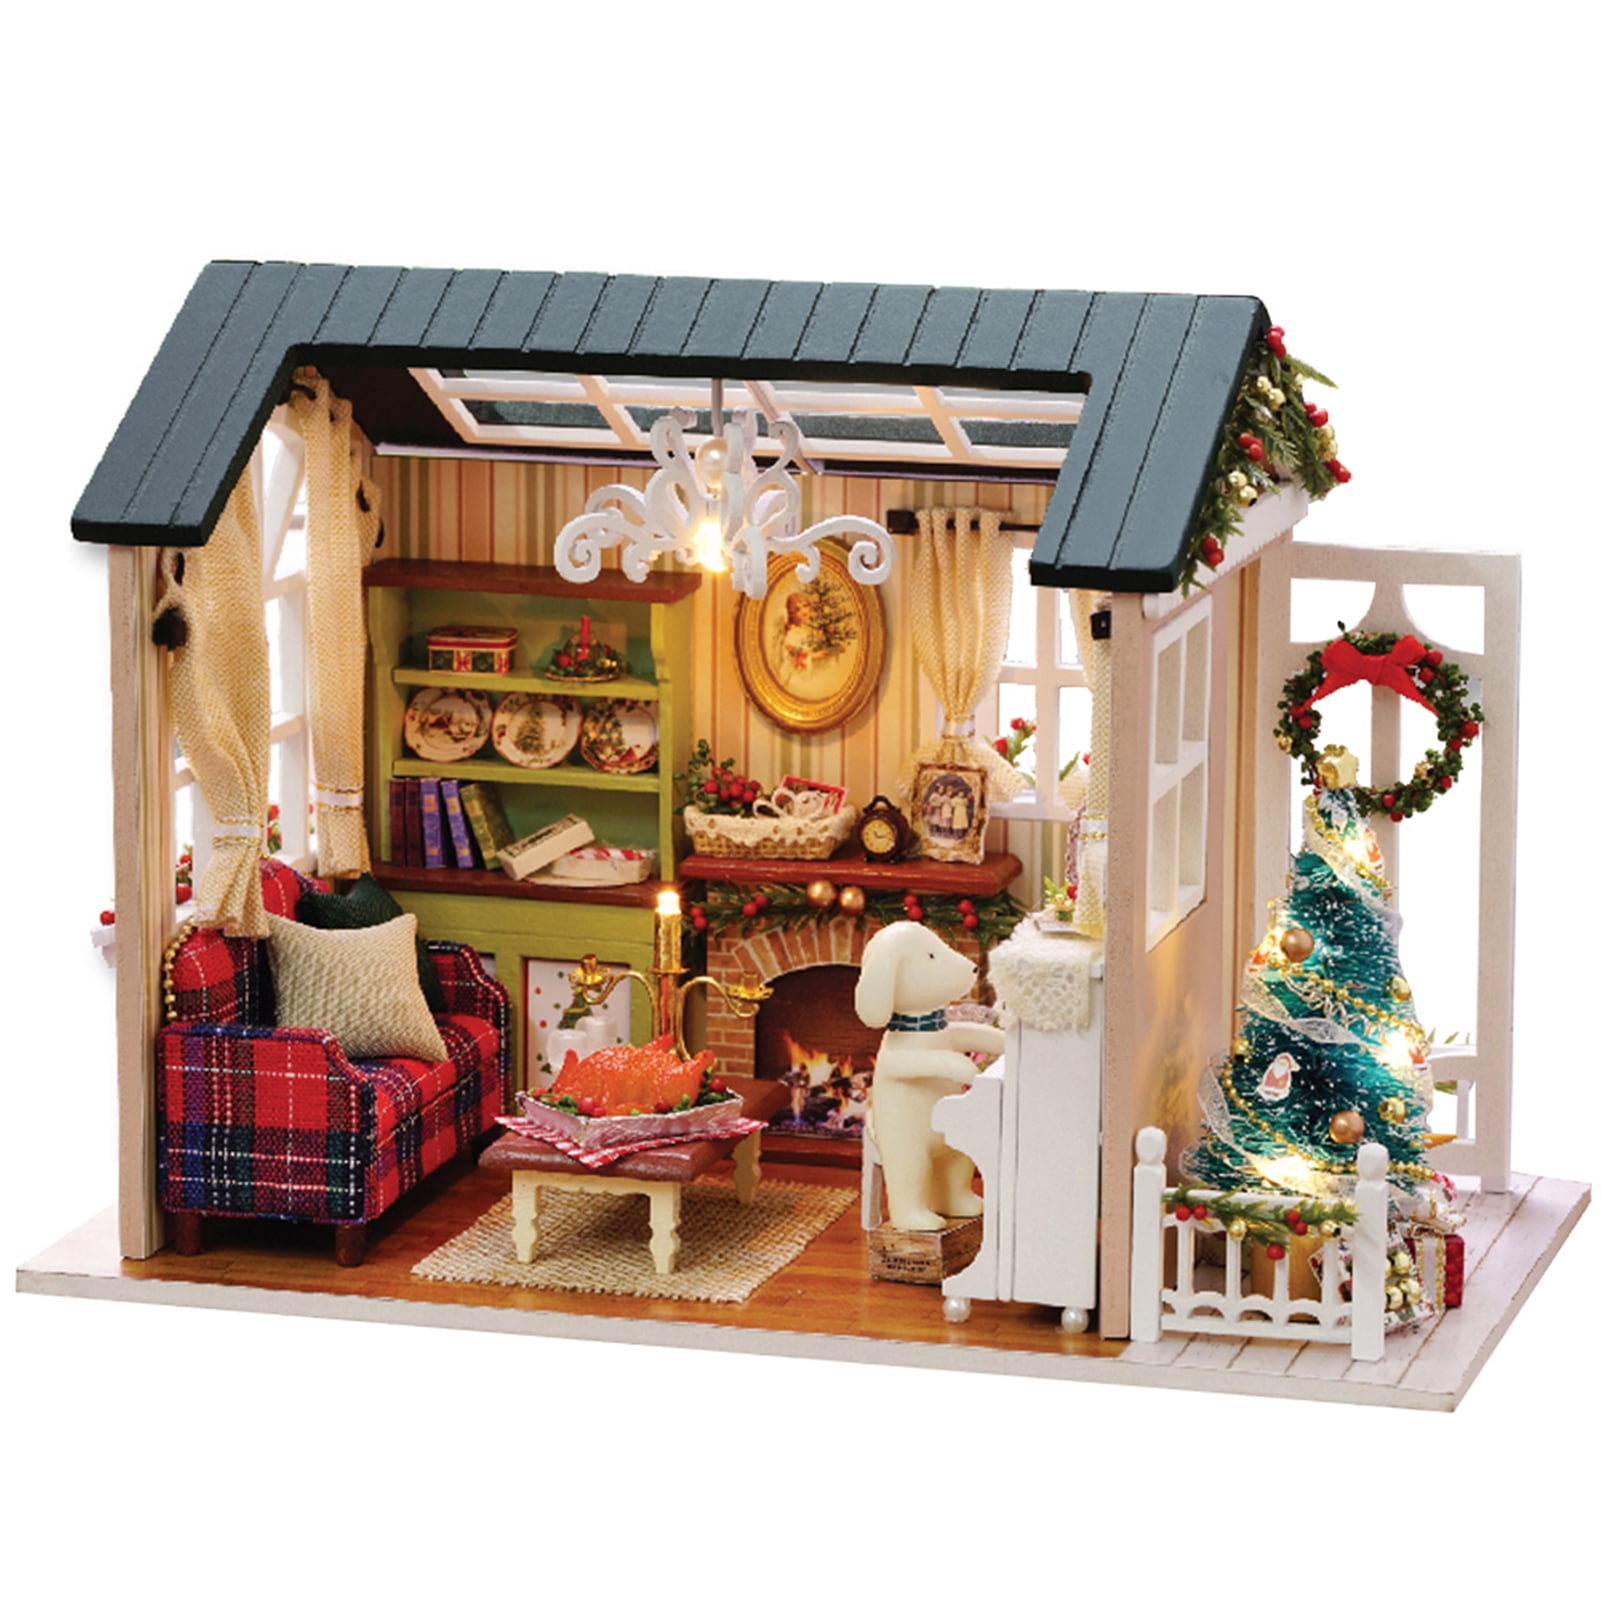  DIY Miniature Dollhouse Kit,UniHobby Time Apartment DIY  Dollhouse Kit with Wooden Furniture Light Gift House Toy for Adults : Toys  & Games